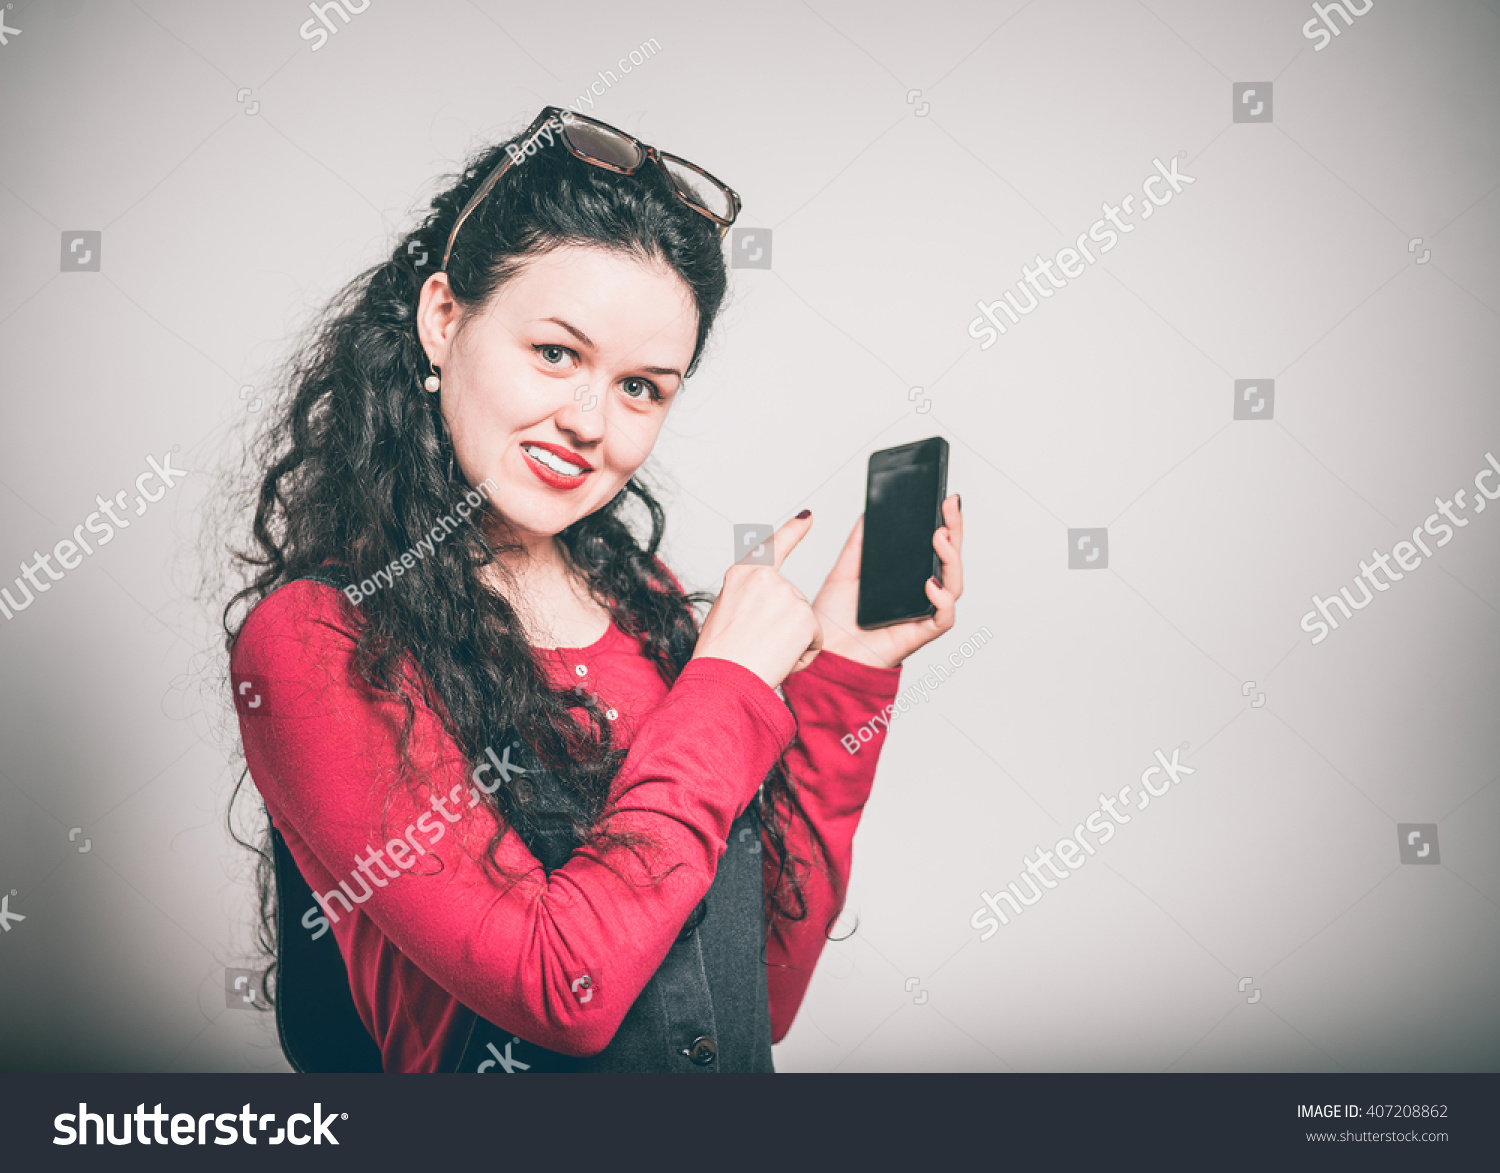 young woman enjoying a touchscreen phone, dressed in a overalls, close-up isolated on a gray background #407208862